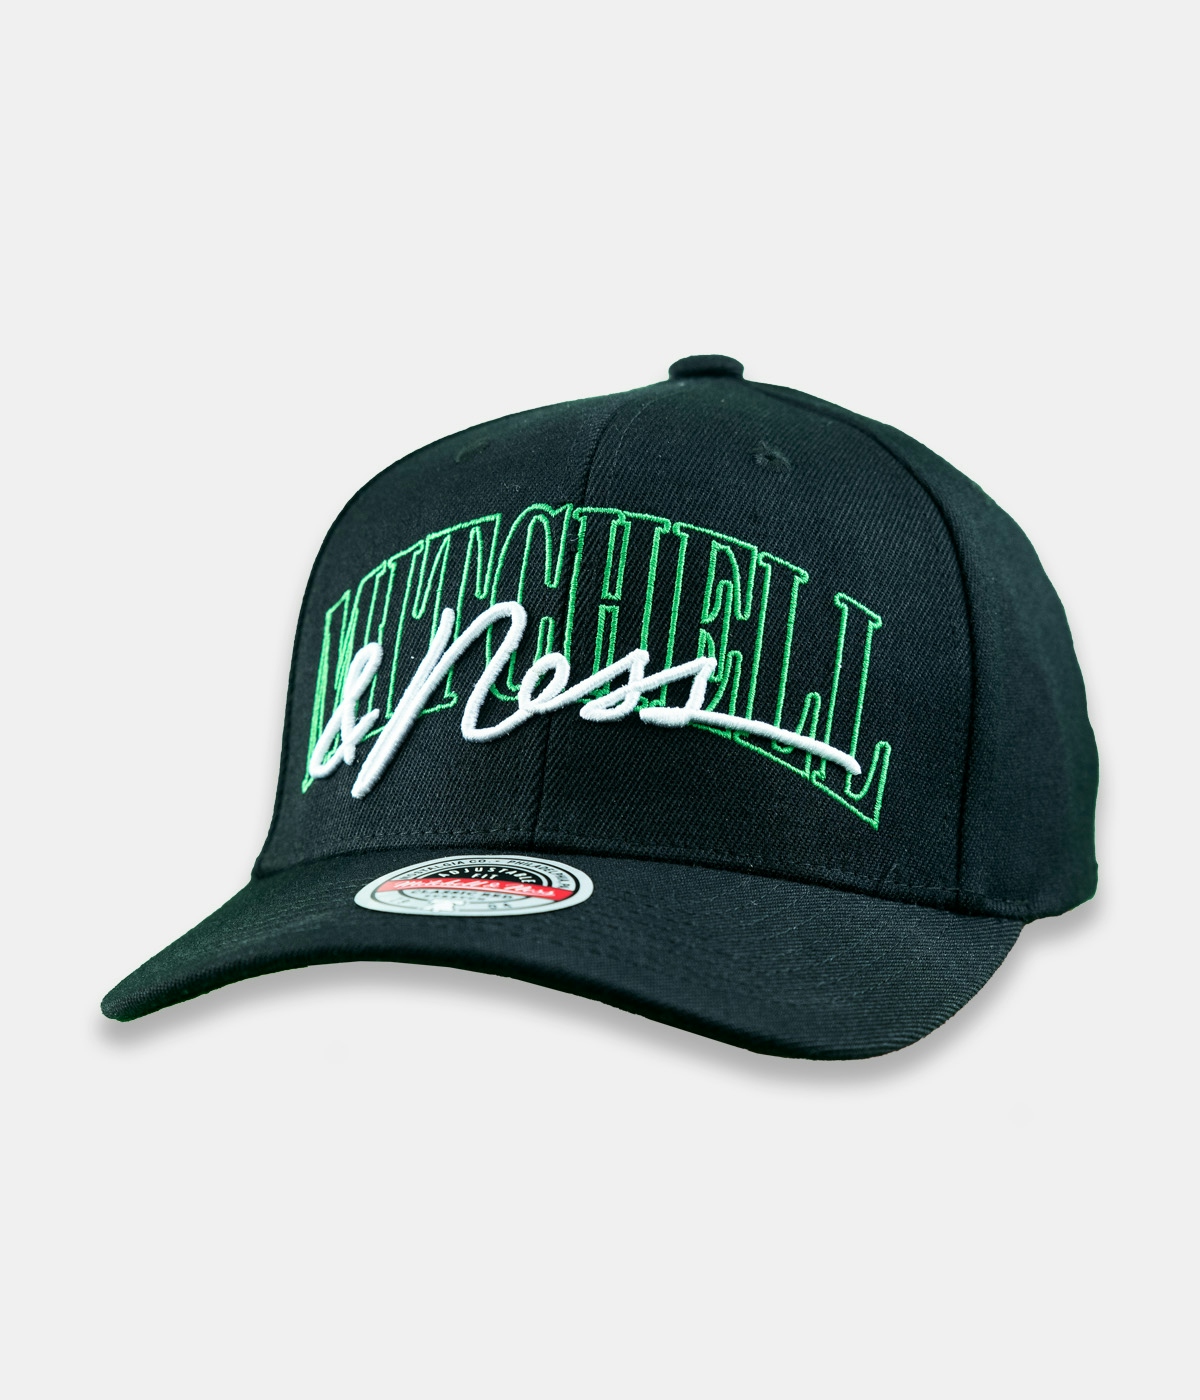 Mitchell & Ness Cap Zone Classic Red - Own Brand Green